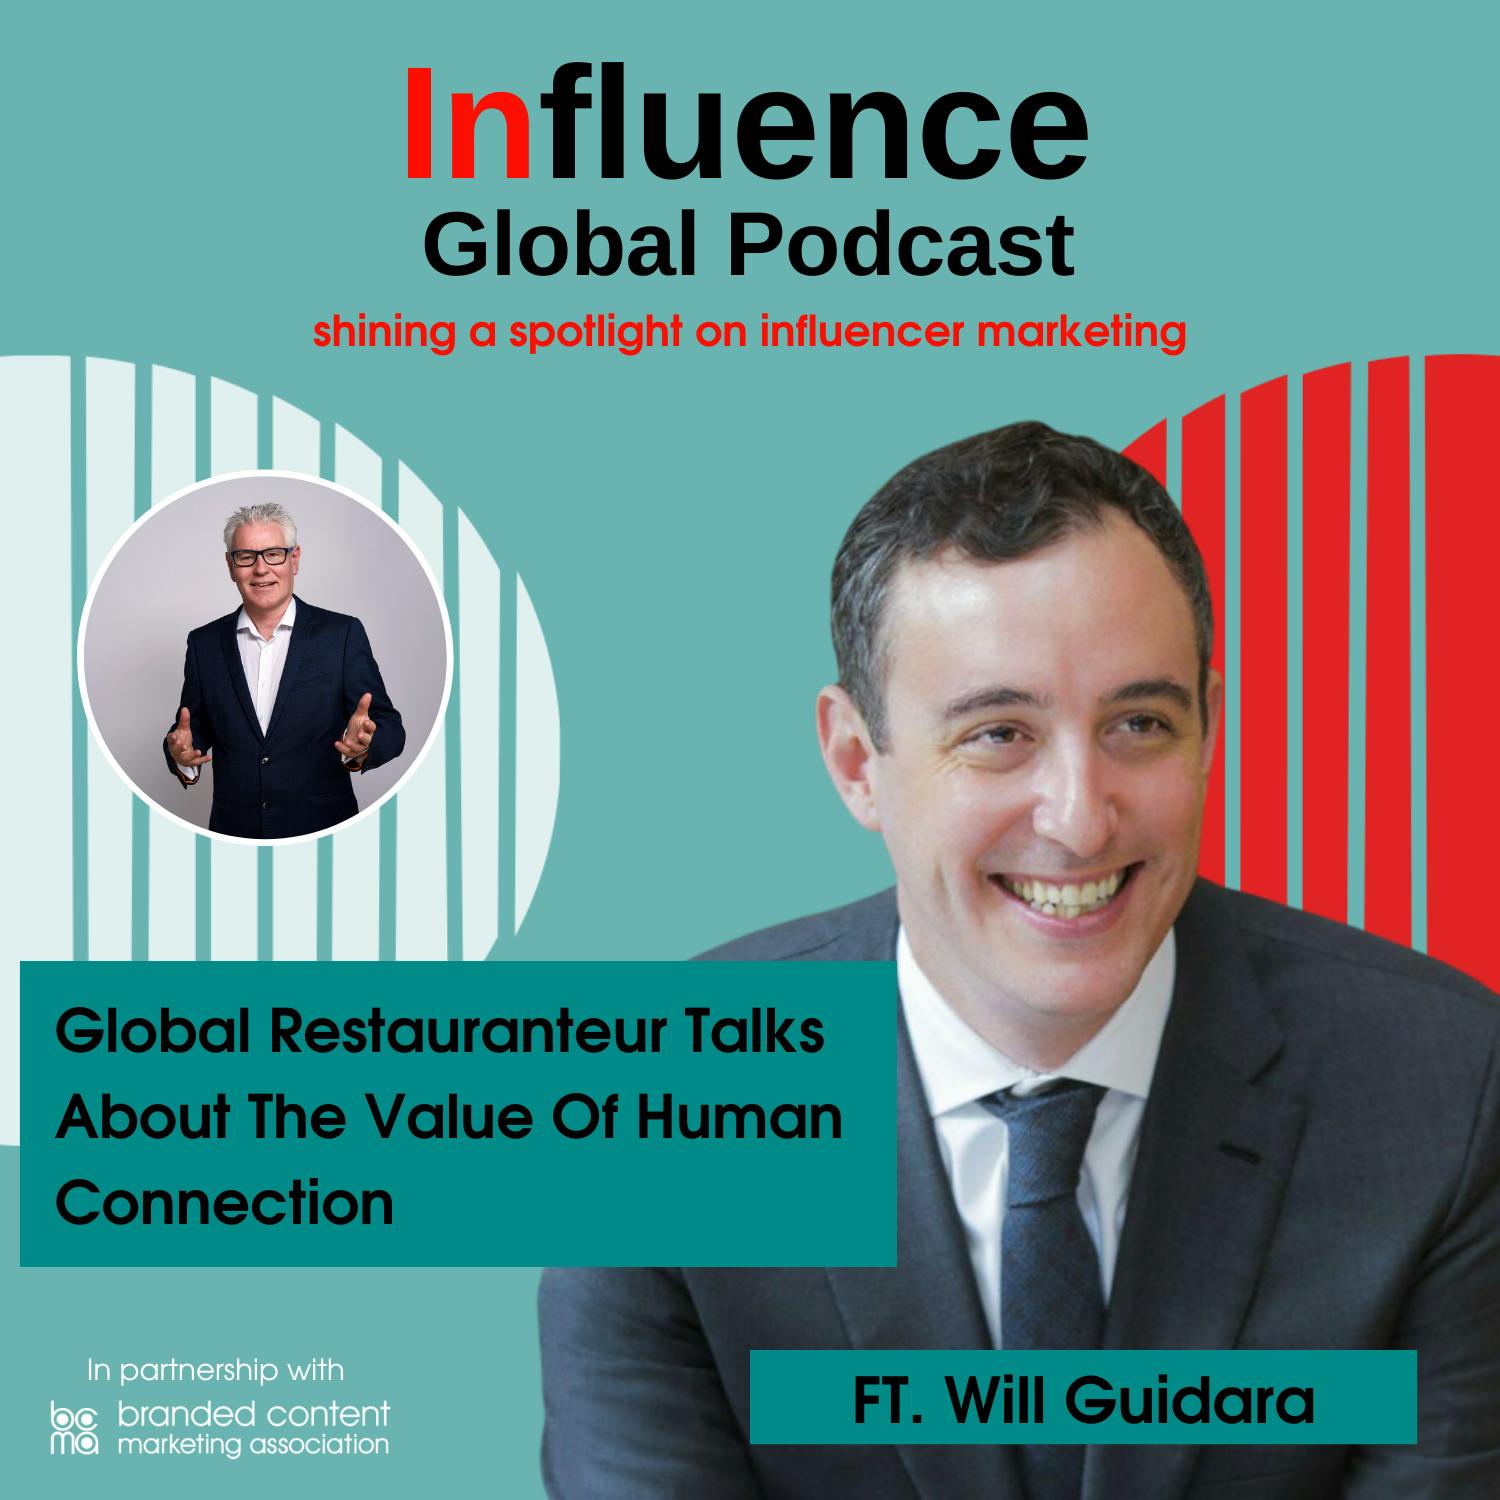 S6 Ep8: Global Restauranteur Talks About The Value Of Human Connection Ft. Will Guidara